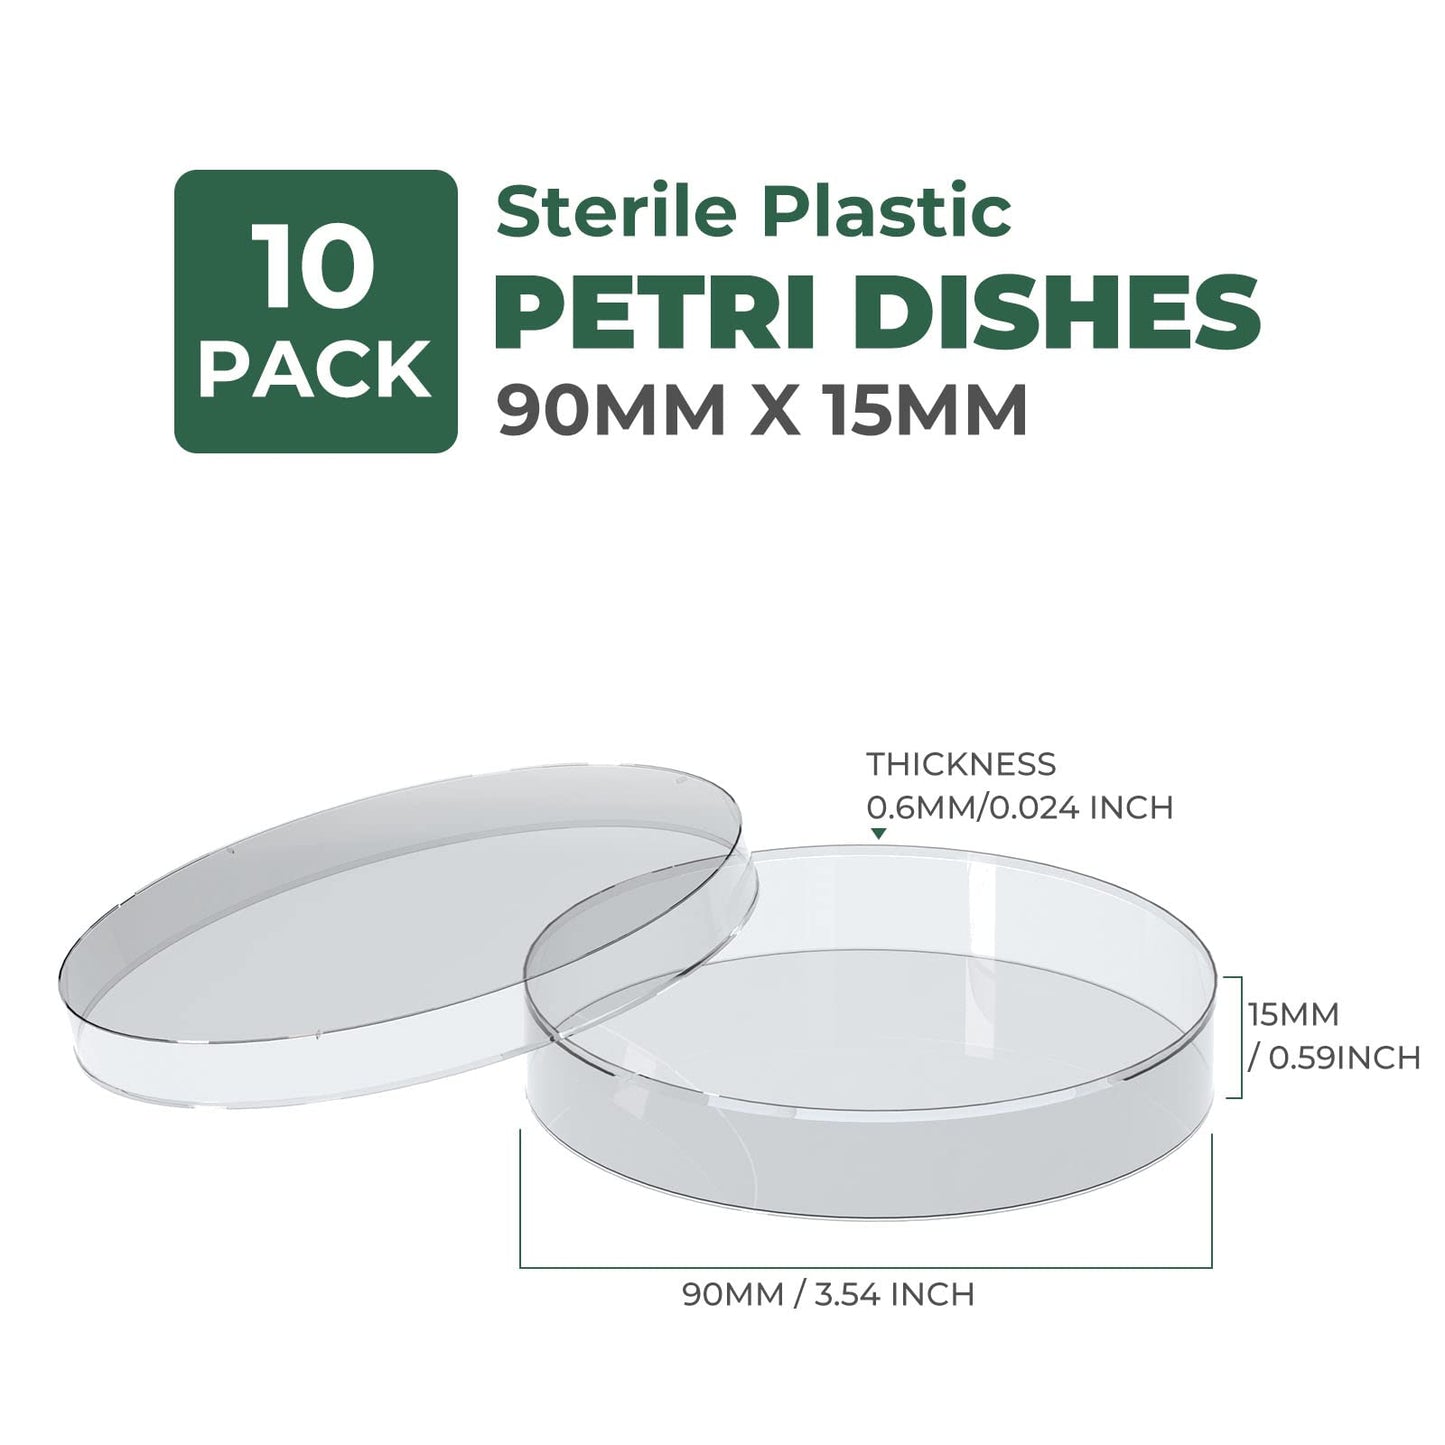 Sterile Thick Plastic Petri Dishes with Lids, 90mm x 15mm